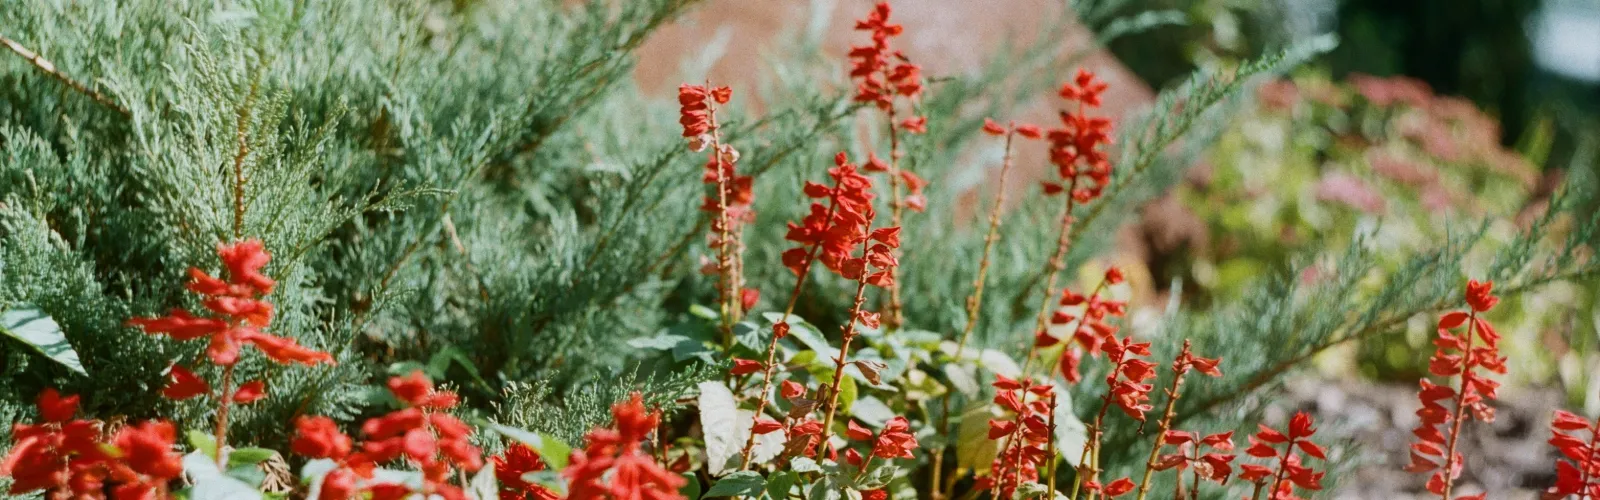 a close-up of some red flowers